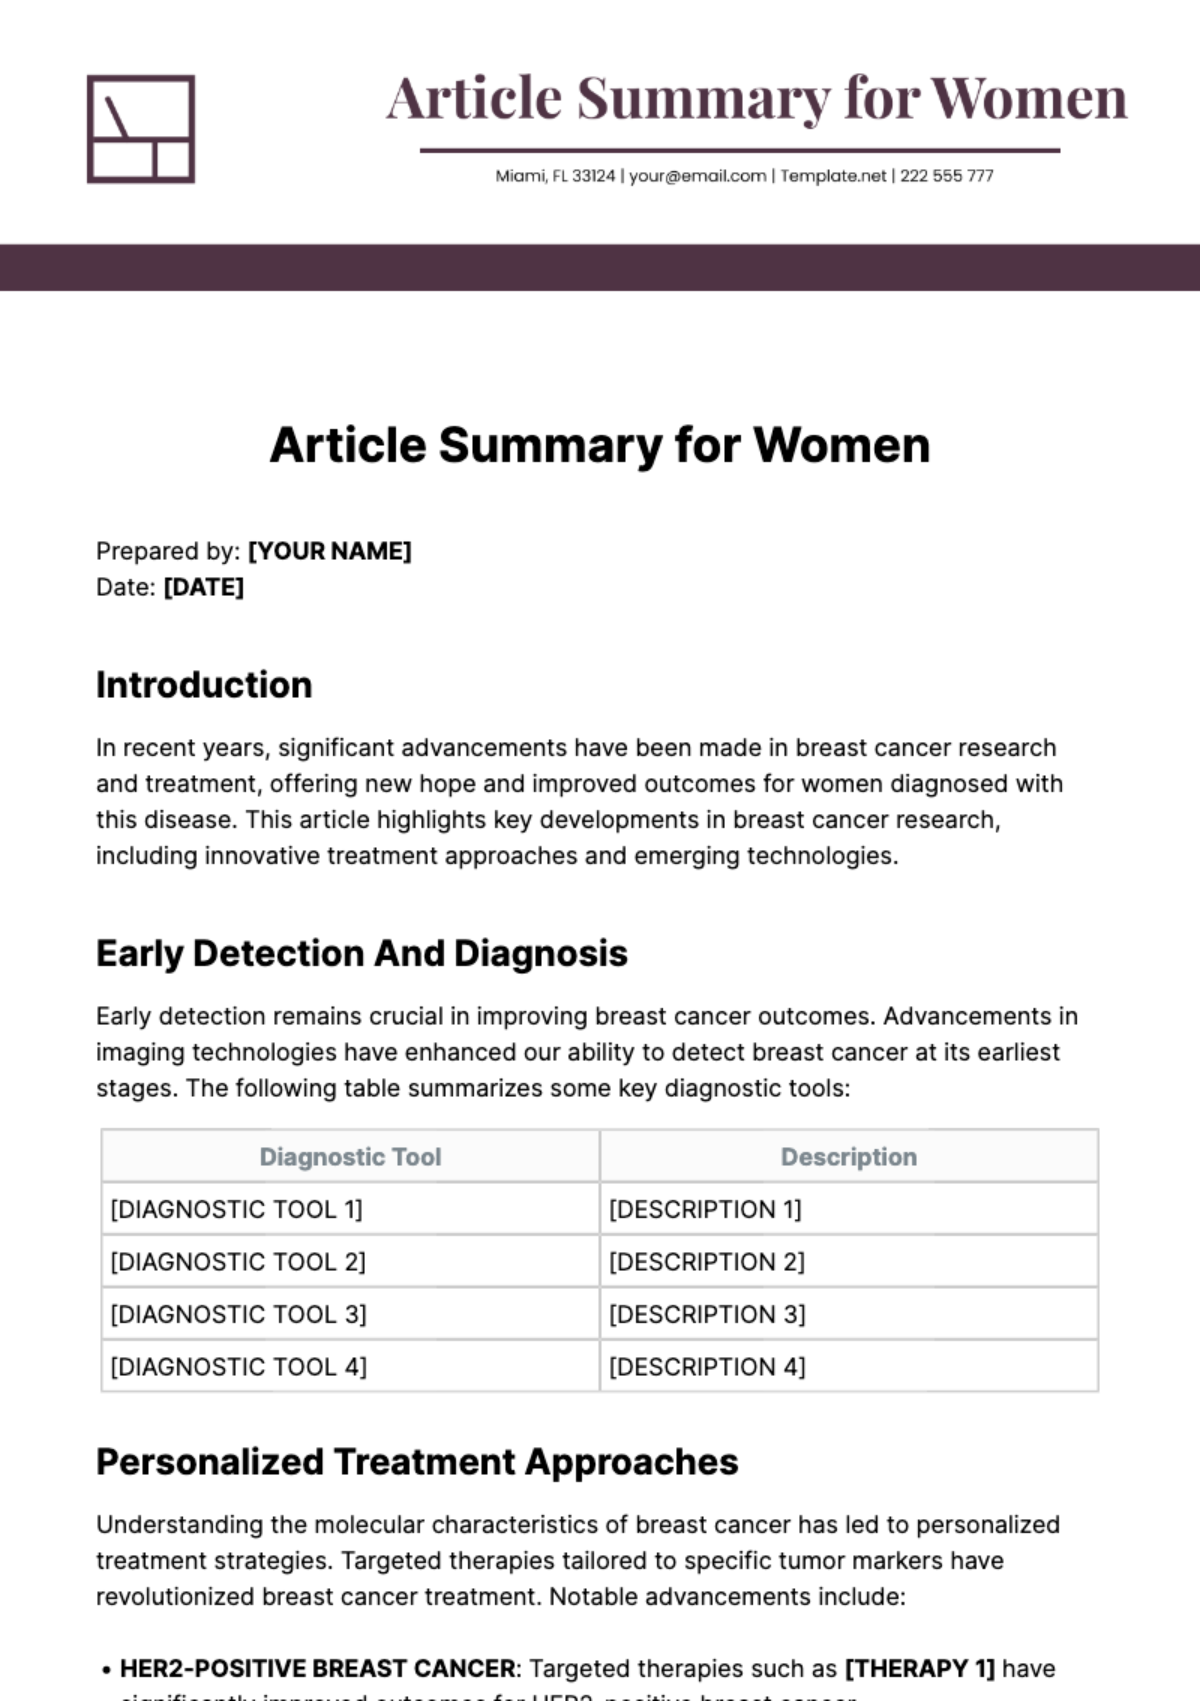 Free Article Summary for Women Template